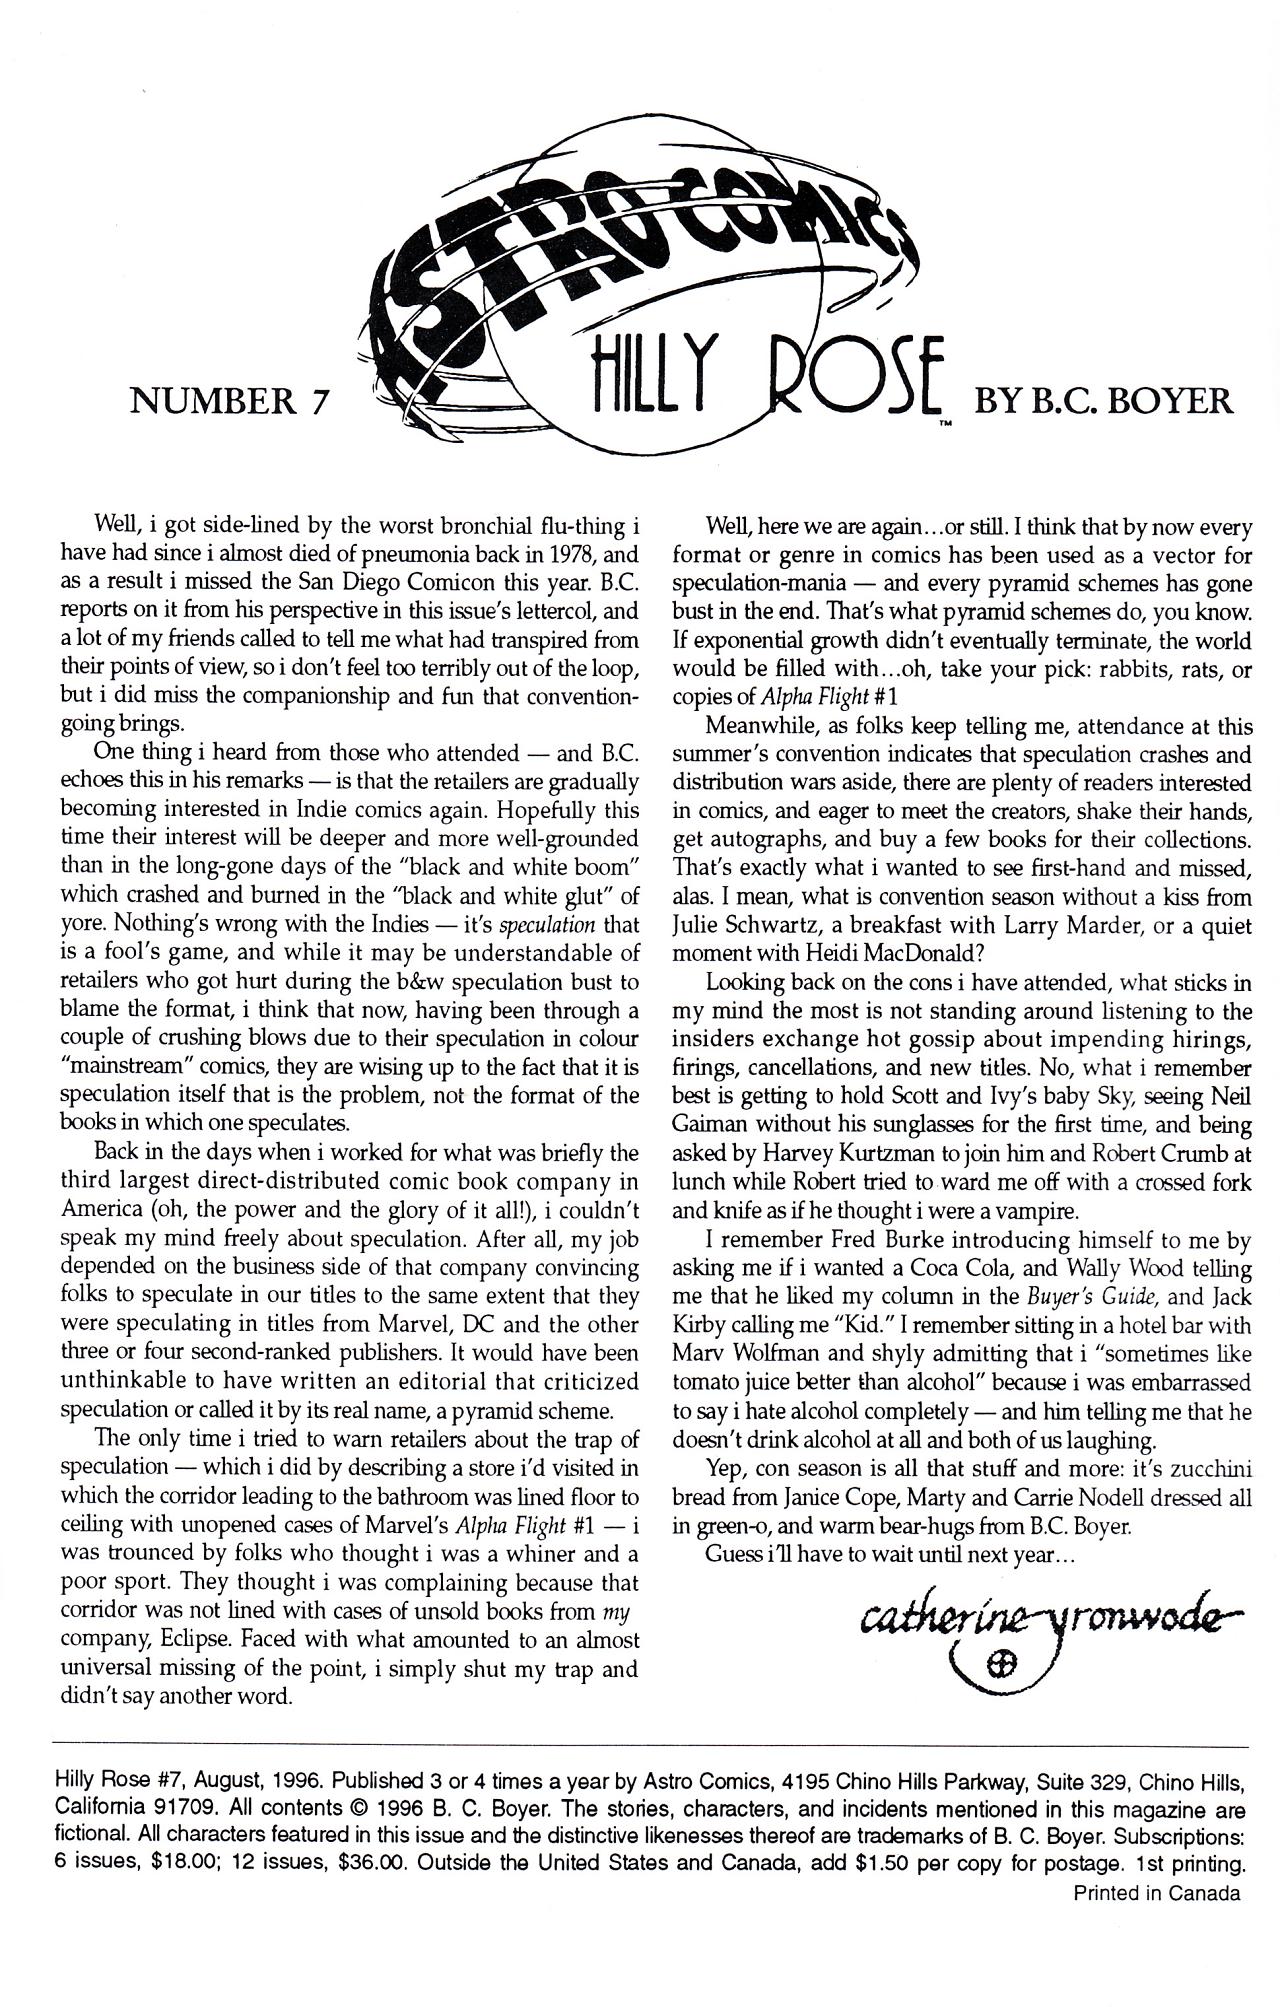 Read online Hilly Rose comic -  Issue #7 - 2